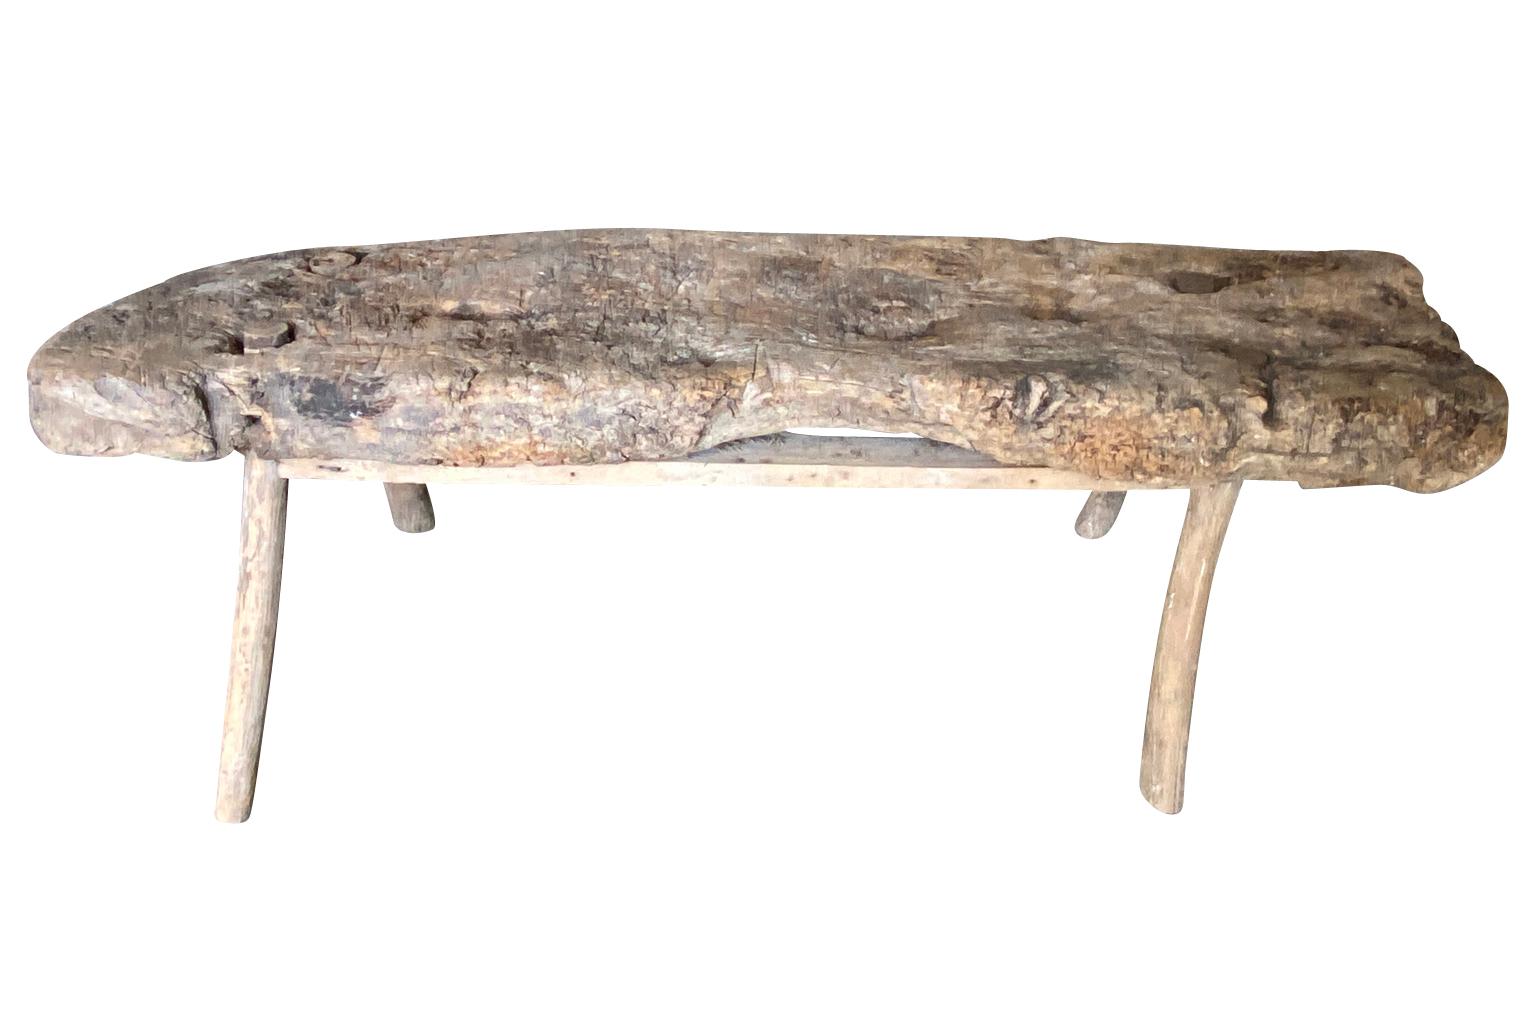 A rustic 18th century Bench - Coffee Table from the Catalan region of Spain.  Soundly constructed from naturally washed oak with a solid board top and wonderful organic shape.  Super patina and graining.